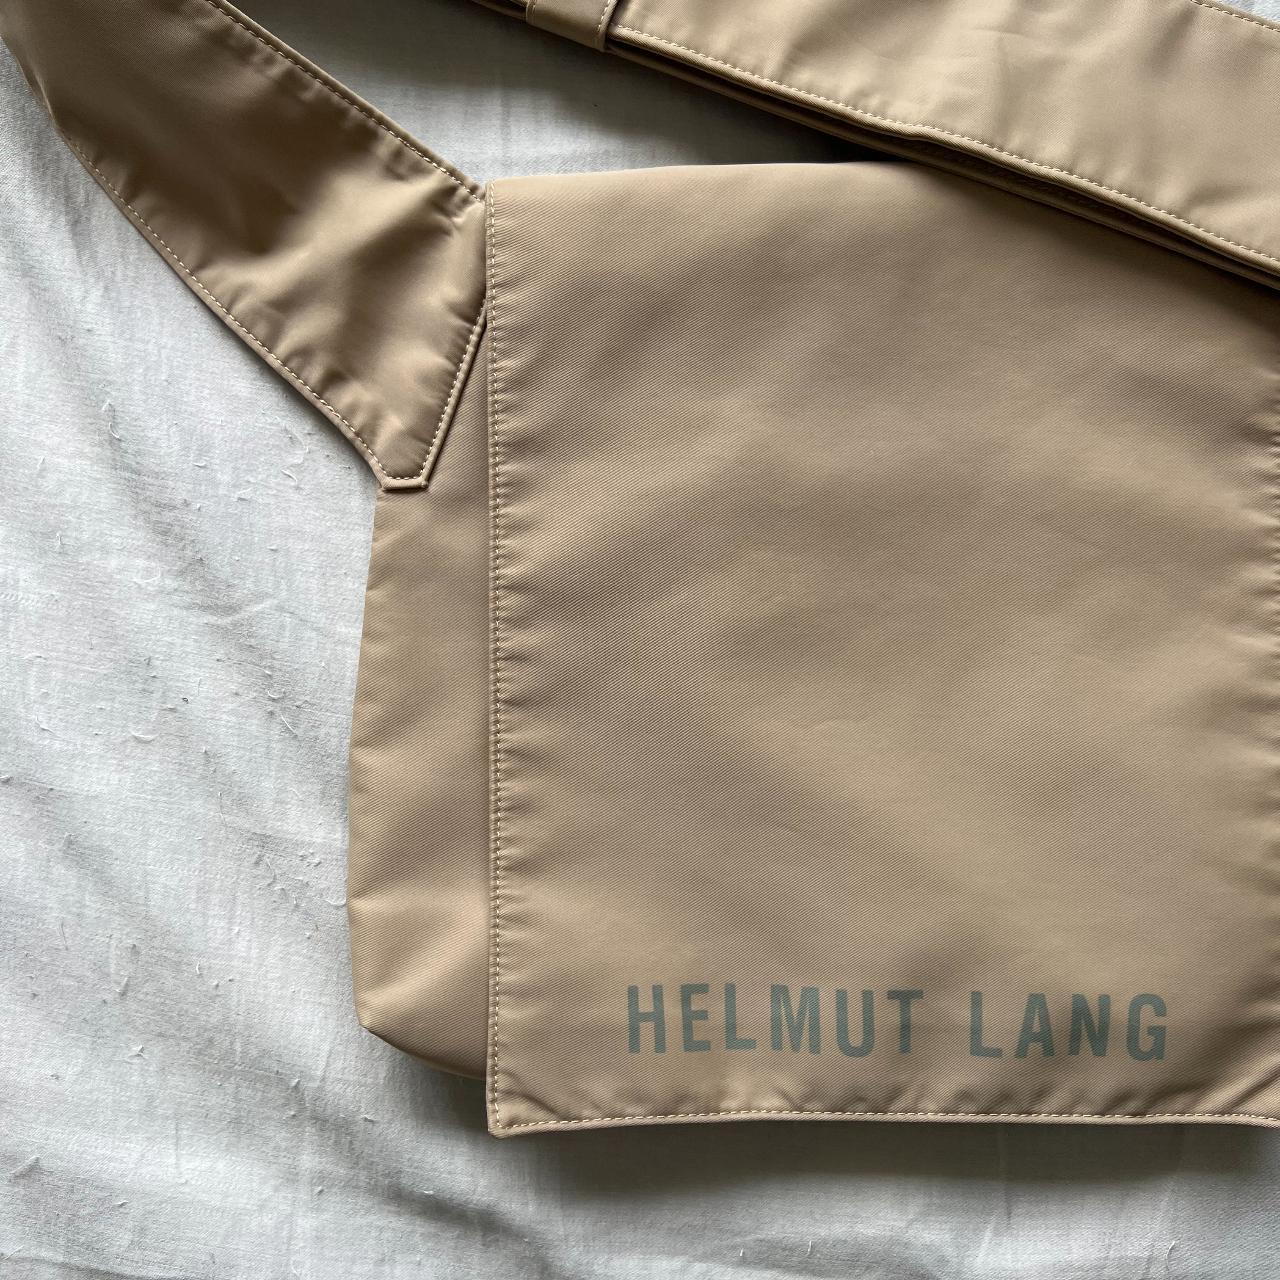 Helmut Lang Archive Crossbody Bag, Size (tagged):